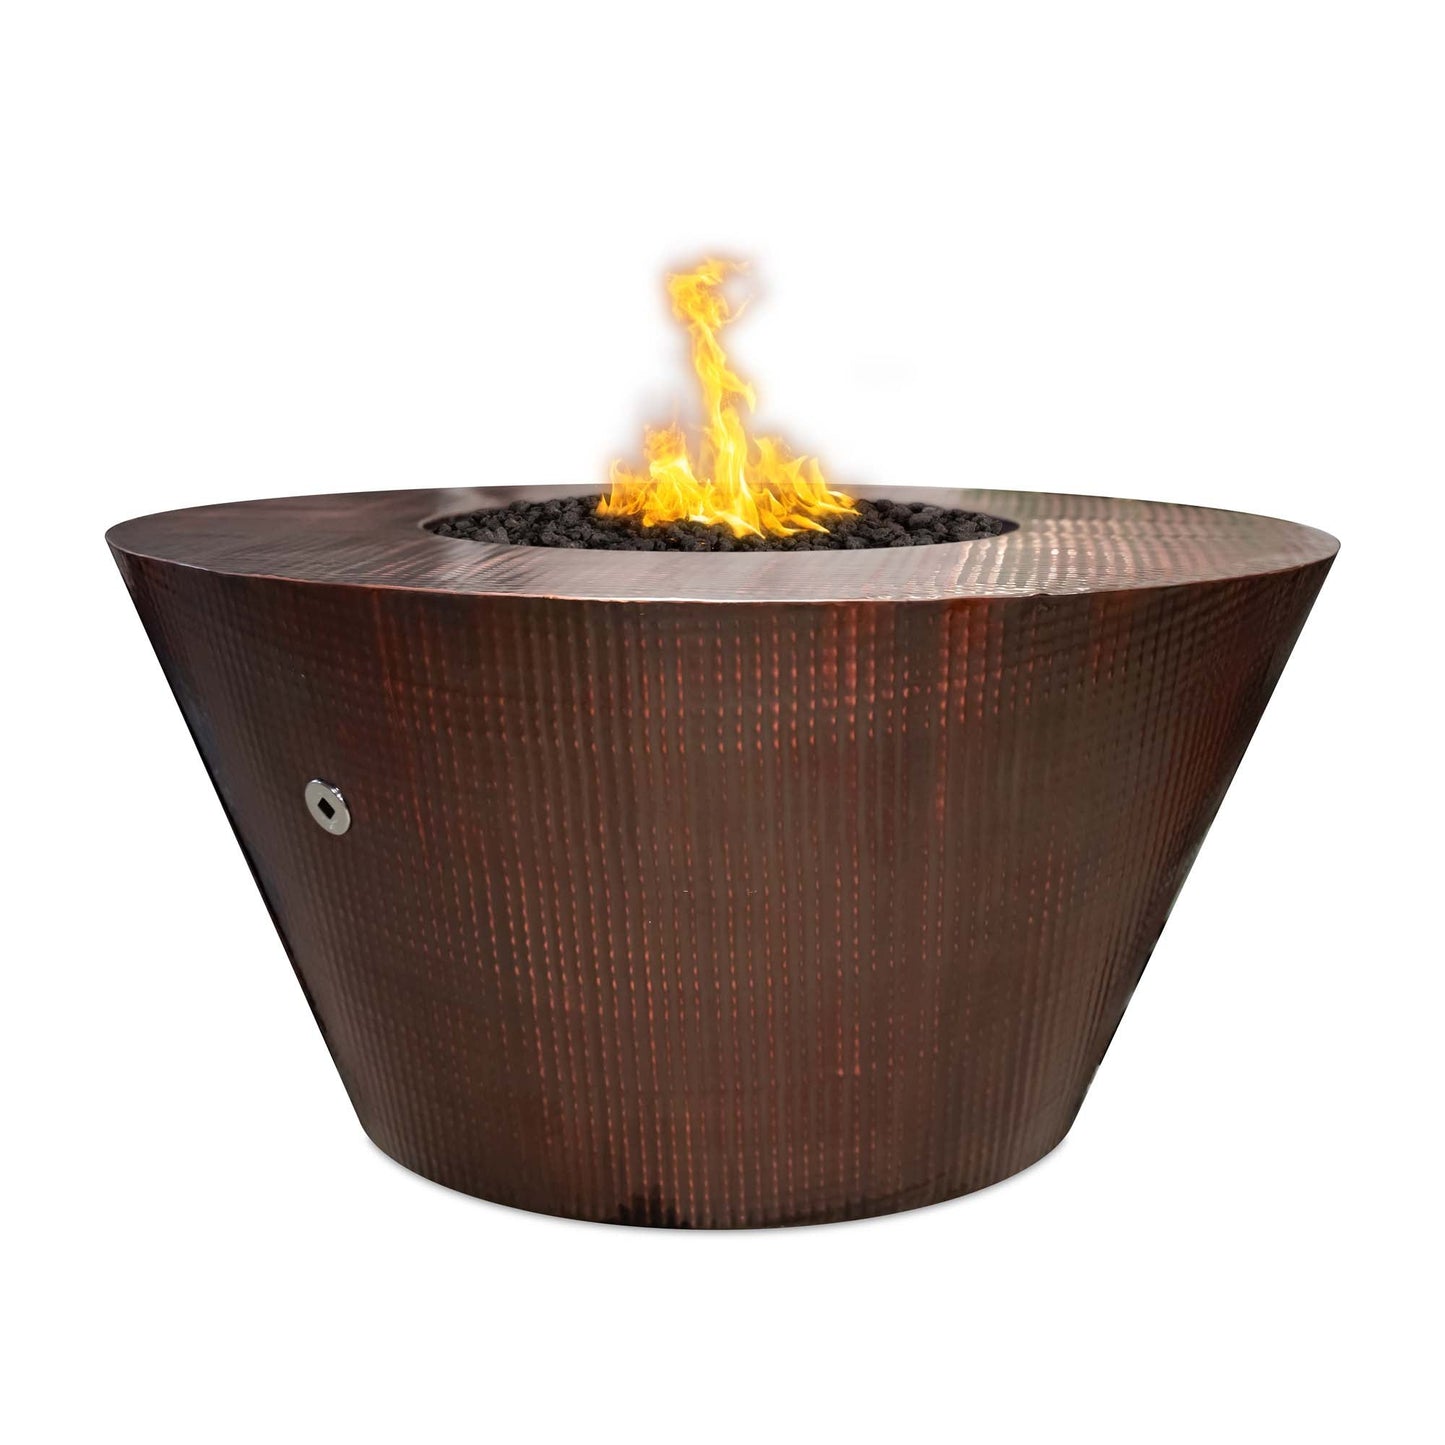 The Outdoor Plus Round Martillo 48" Copper Vein Powder Coated Metal Liquid Propane Fire Pit with Flame Sense with Spark Ignition